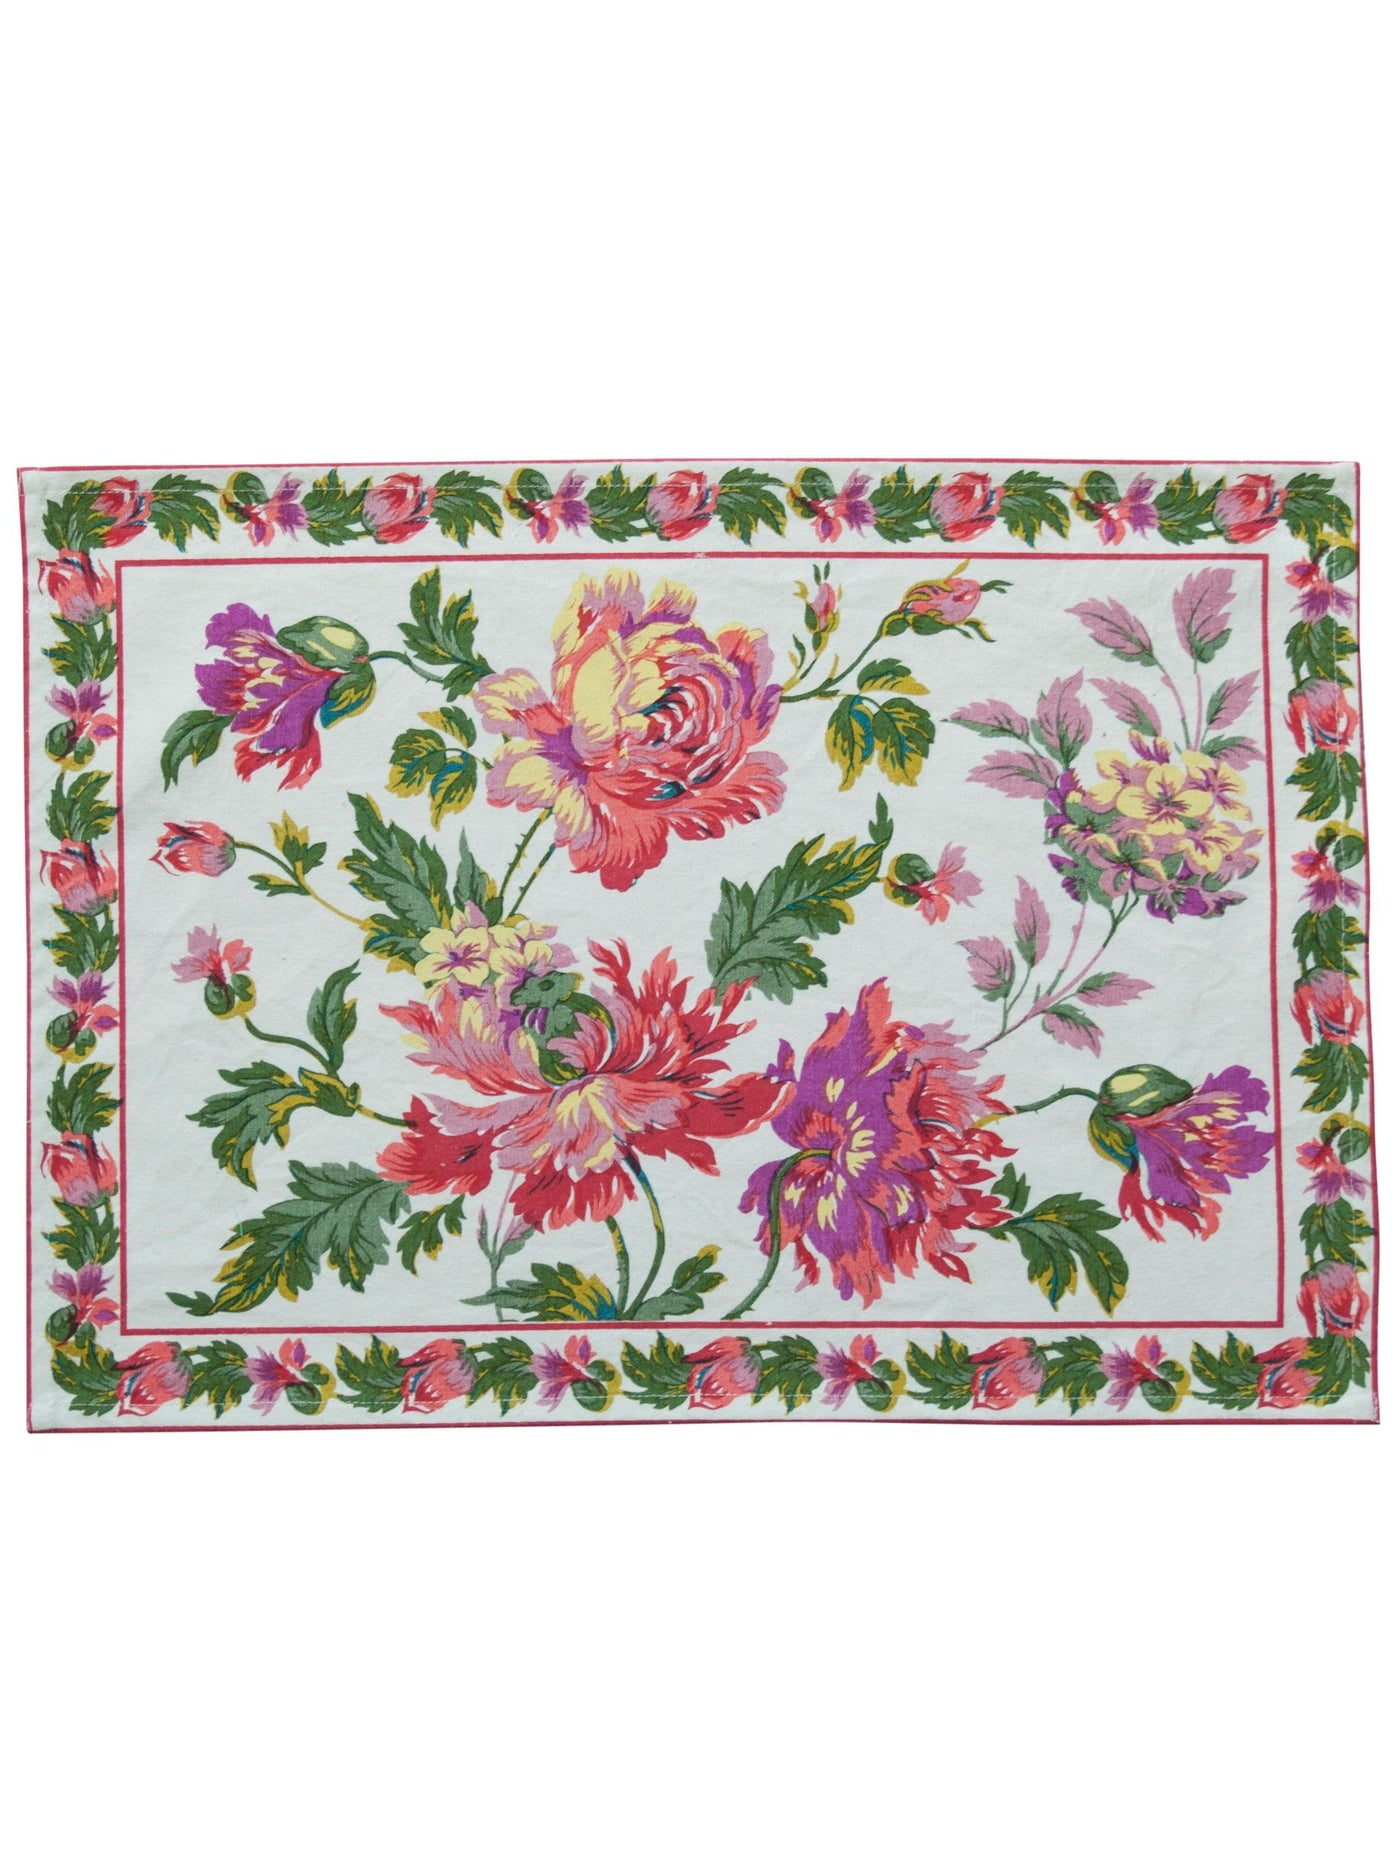 Pecan Pie Cotton Placemat in Ecru | April Cornell- SOLD OUT